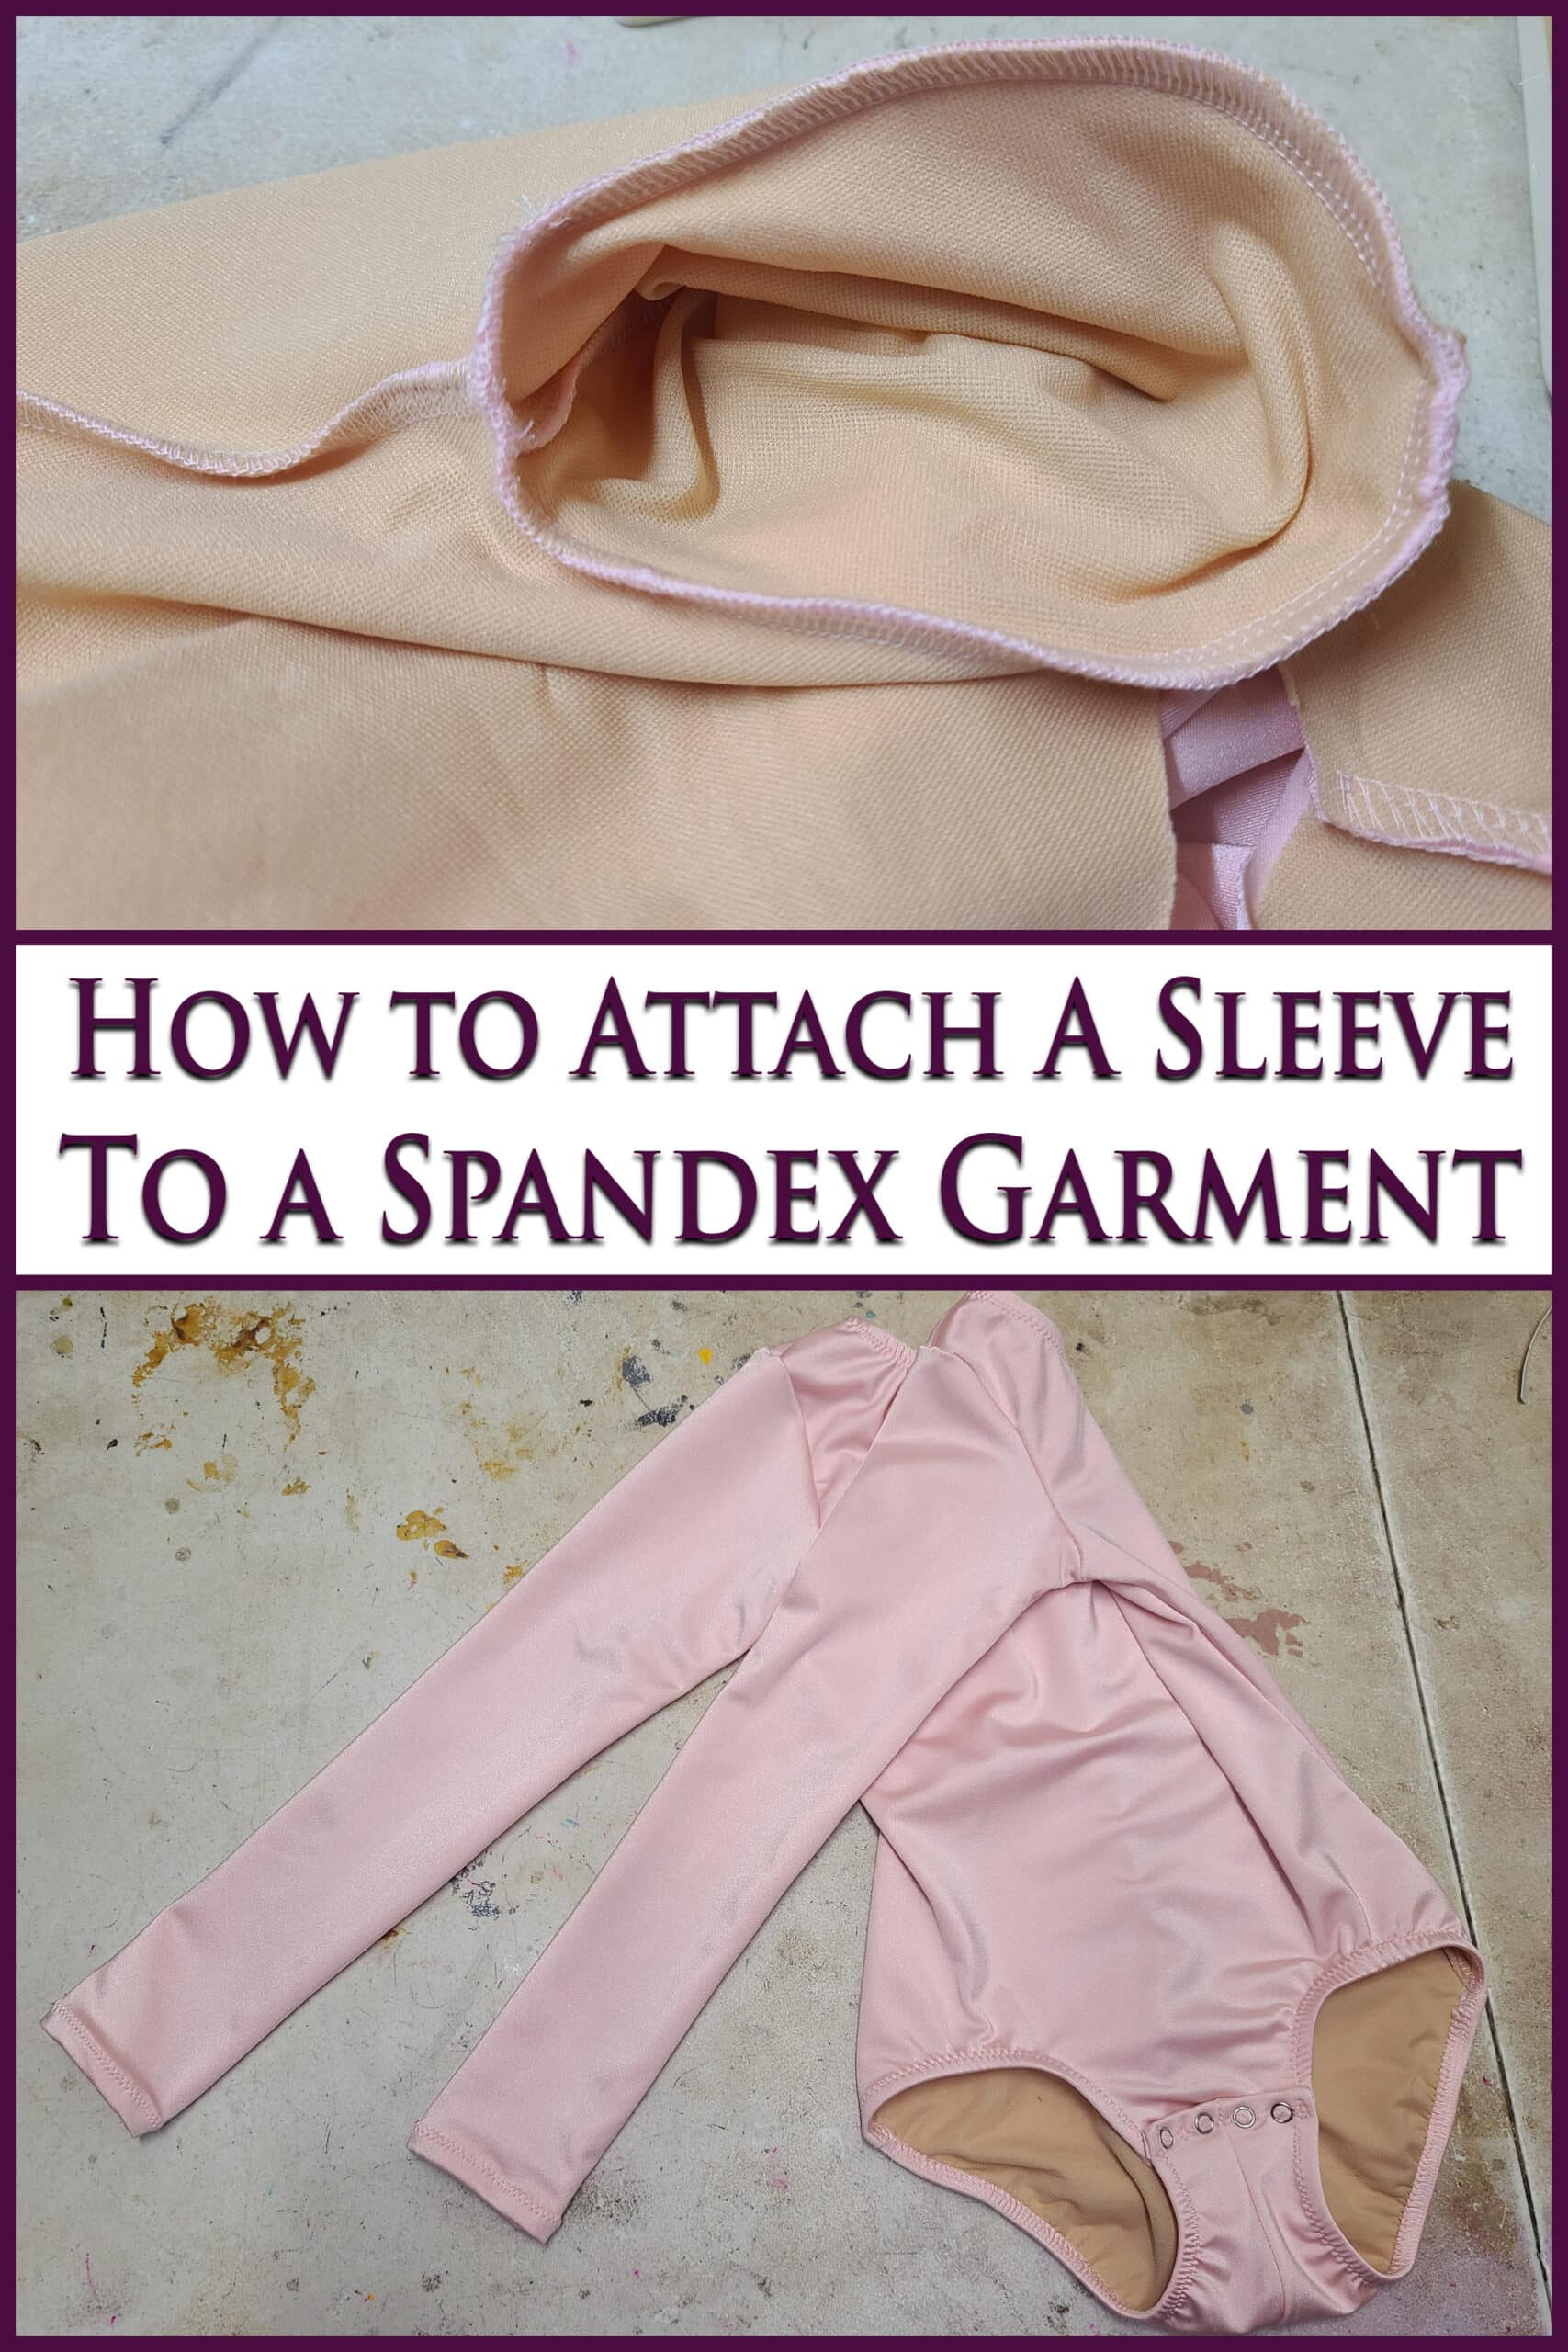 A 2 part image showing a A pink bodysuit with long sleeves being made.  Overlaid text says how to attach a sleeve to a spandex garment.